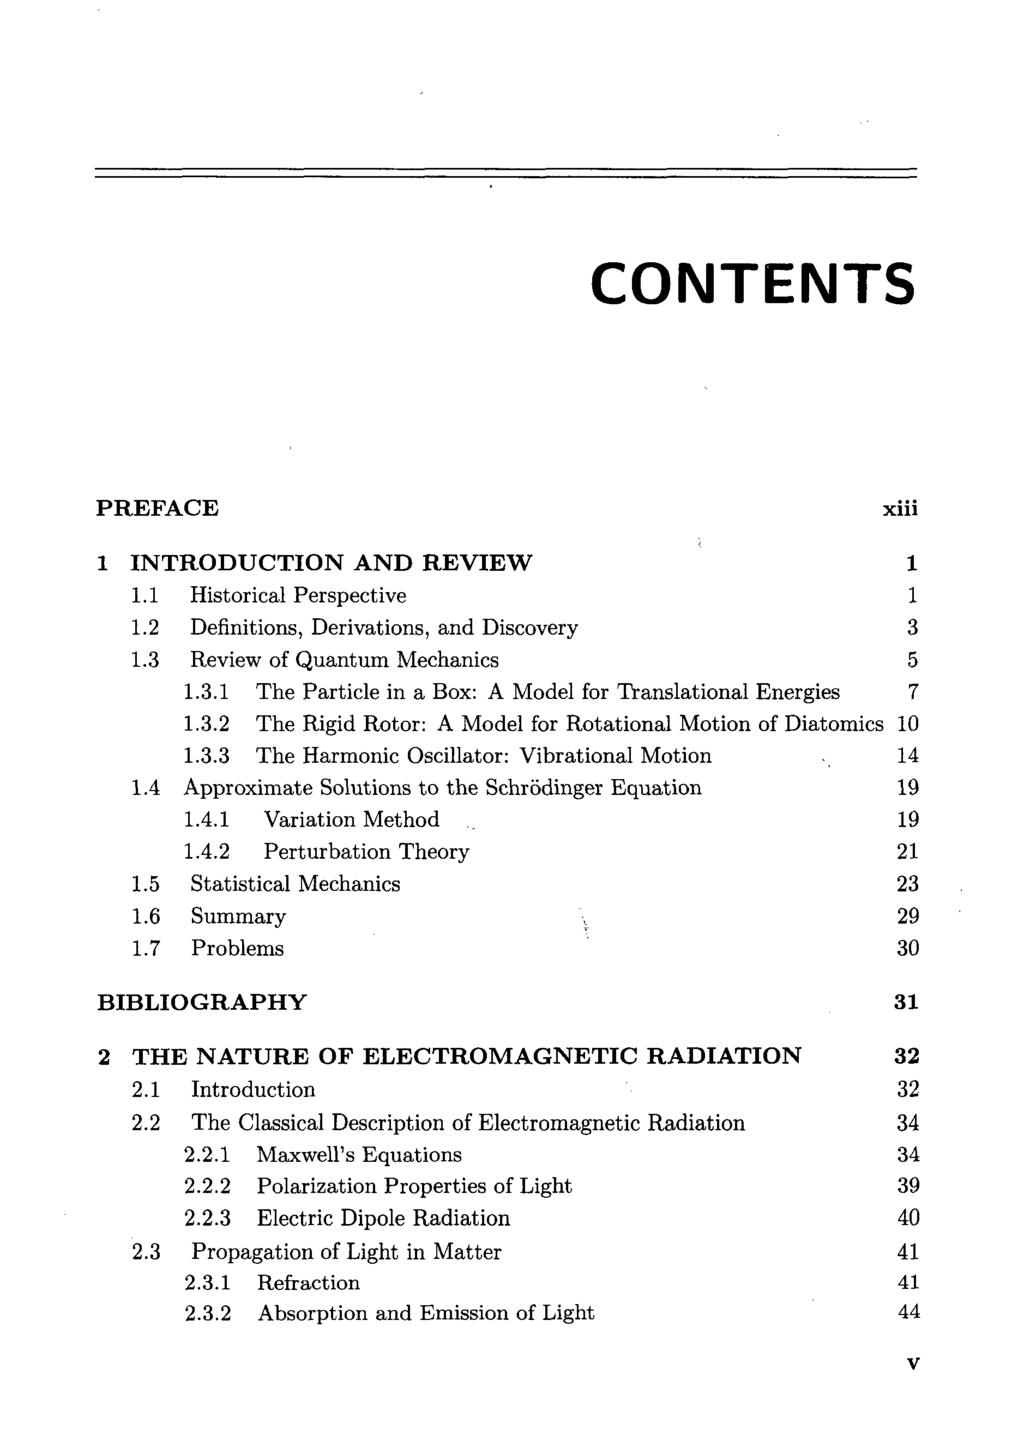 CONTENTS PREFACE xiii 1 INTRODUCTION AND REVIEW 1 1.1 Historical Perspective 1 1.2 Definitions, Derivations, and Discovery 3 1.3 Review of Quantum Mechanics 5 1.3.1 The Particle in a Box: A Model for Translational Energies 7 1.